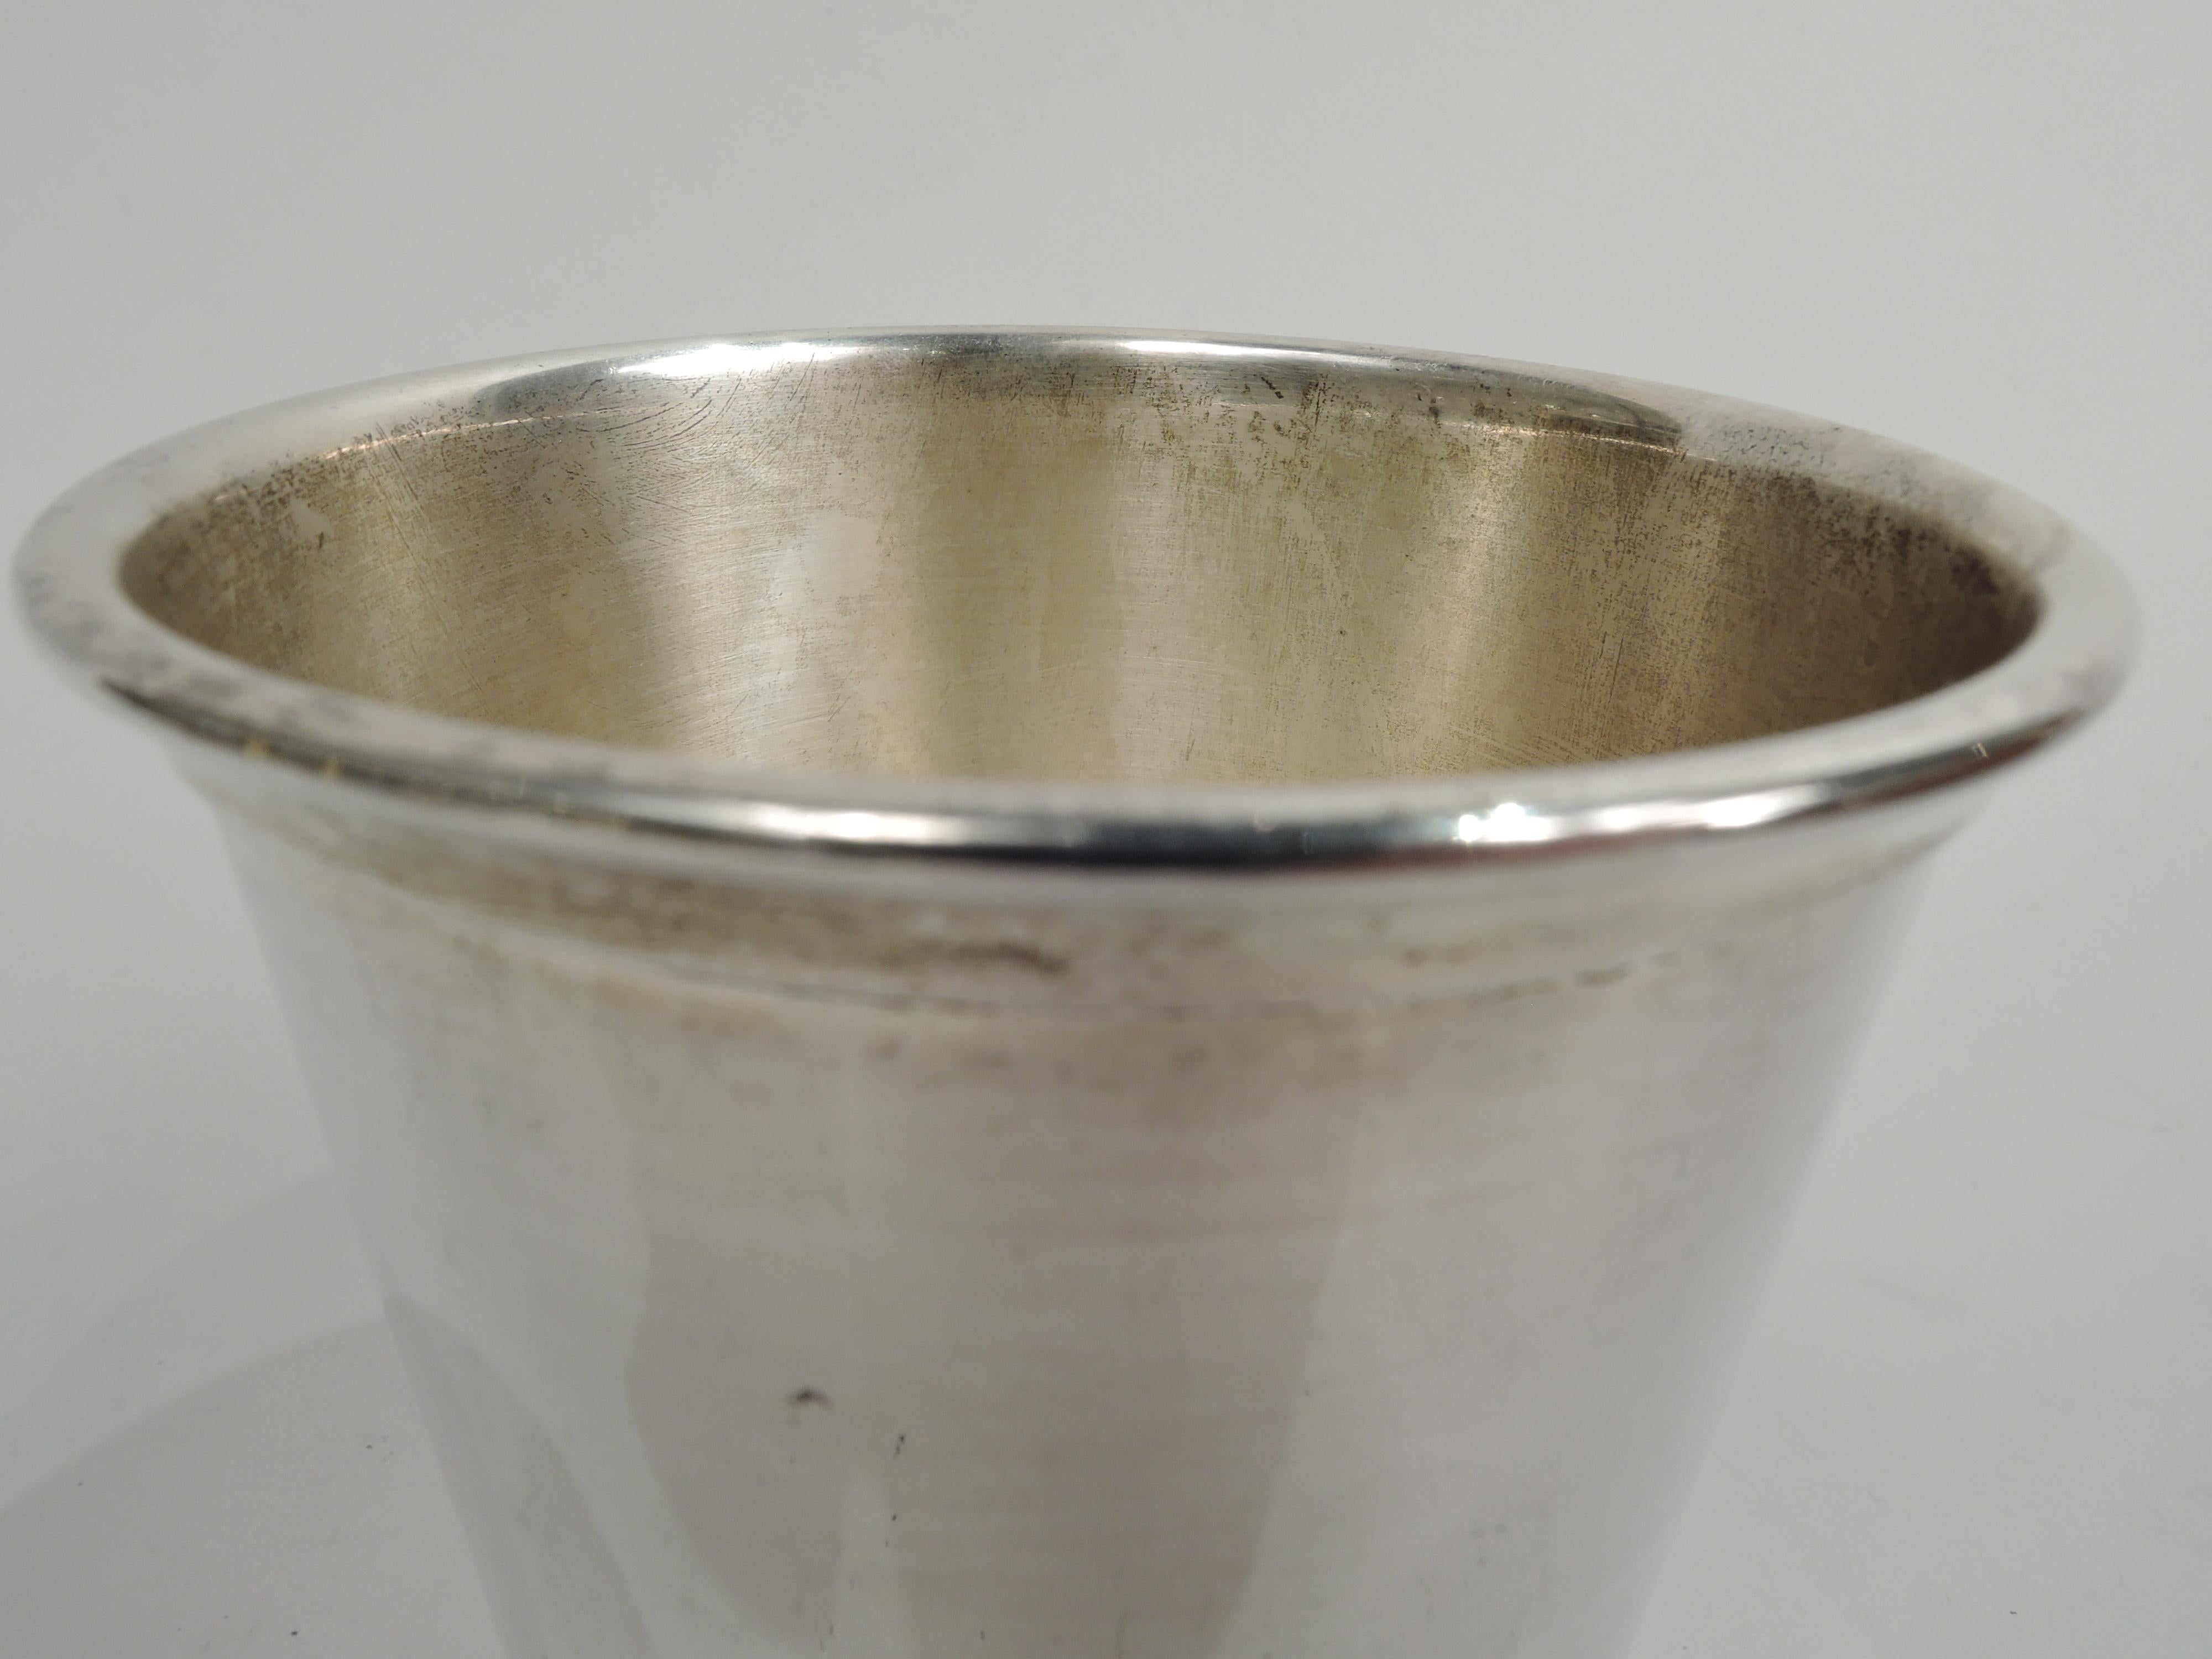 Solo sterling silver mint julep cup. Made by Webster Co. in North Attleboro, Mass. Straight and tapering sides, and molded rim. A great home-alone accessory. Fully marked including maker’s stamp and no. 8555. Weight: 3.4 troy ounces.